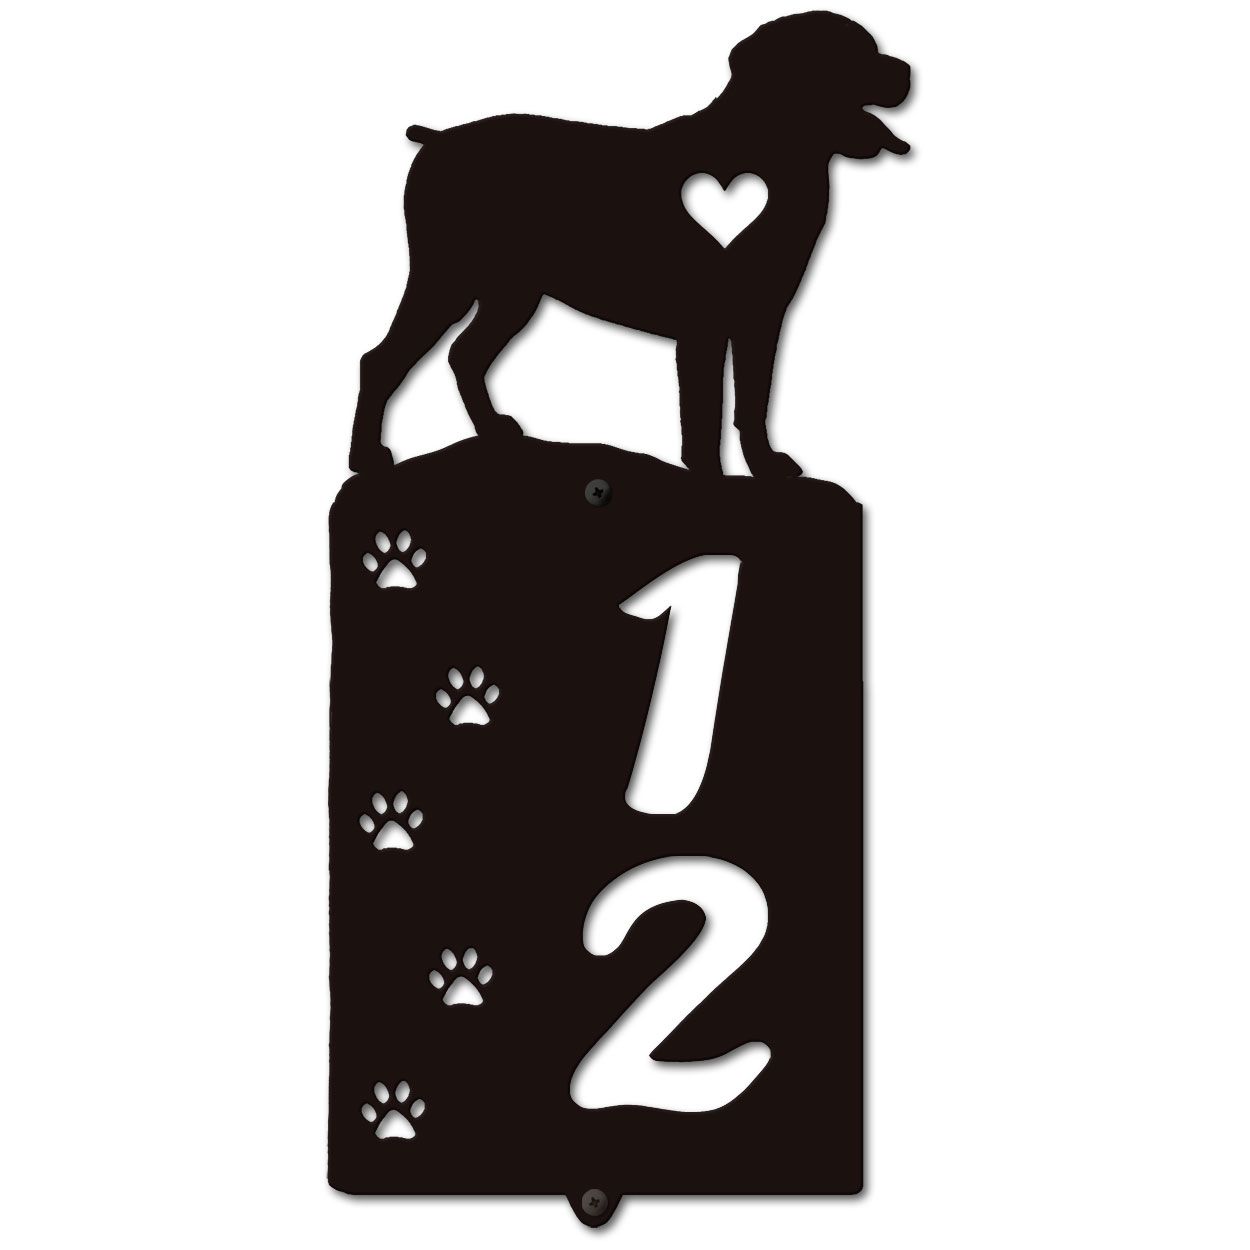 636312 - Rottweiler Cut Outs Two Digit Address Number Plaque